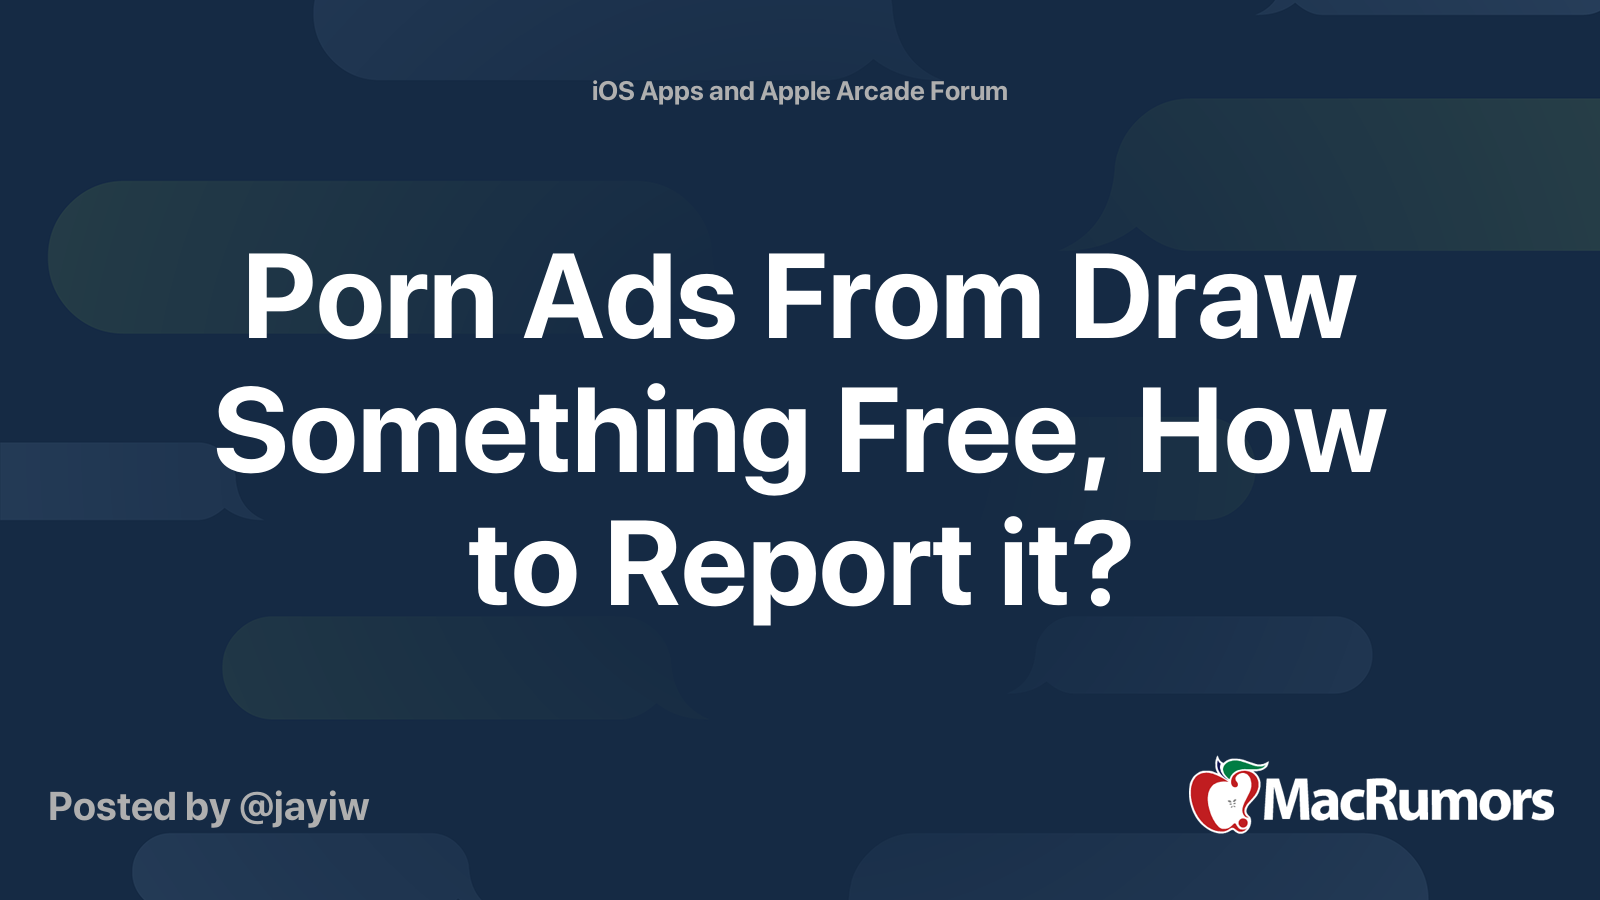 Porn Ads From Draw Something Free, How to Report it? MacRumors Forums